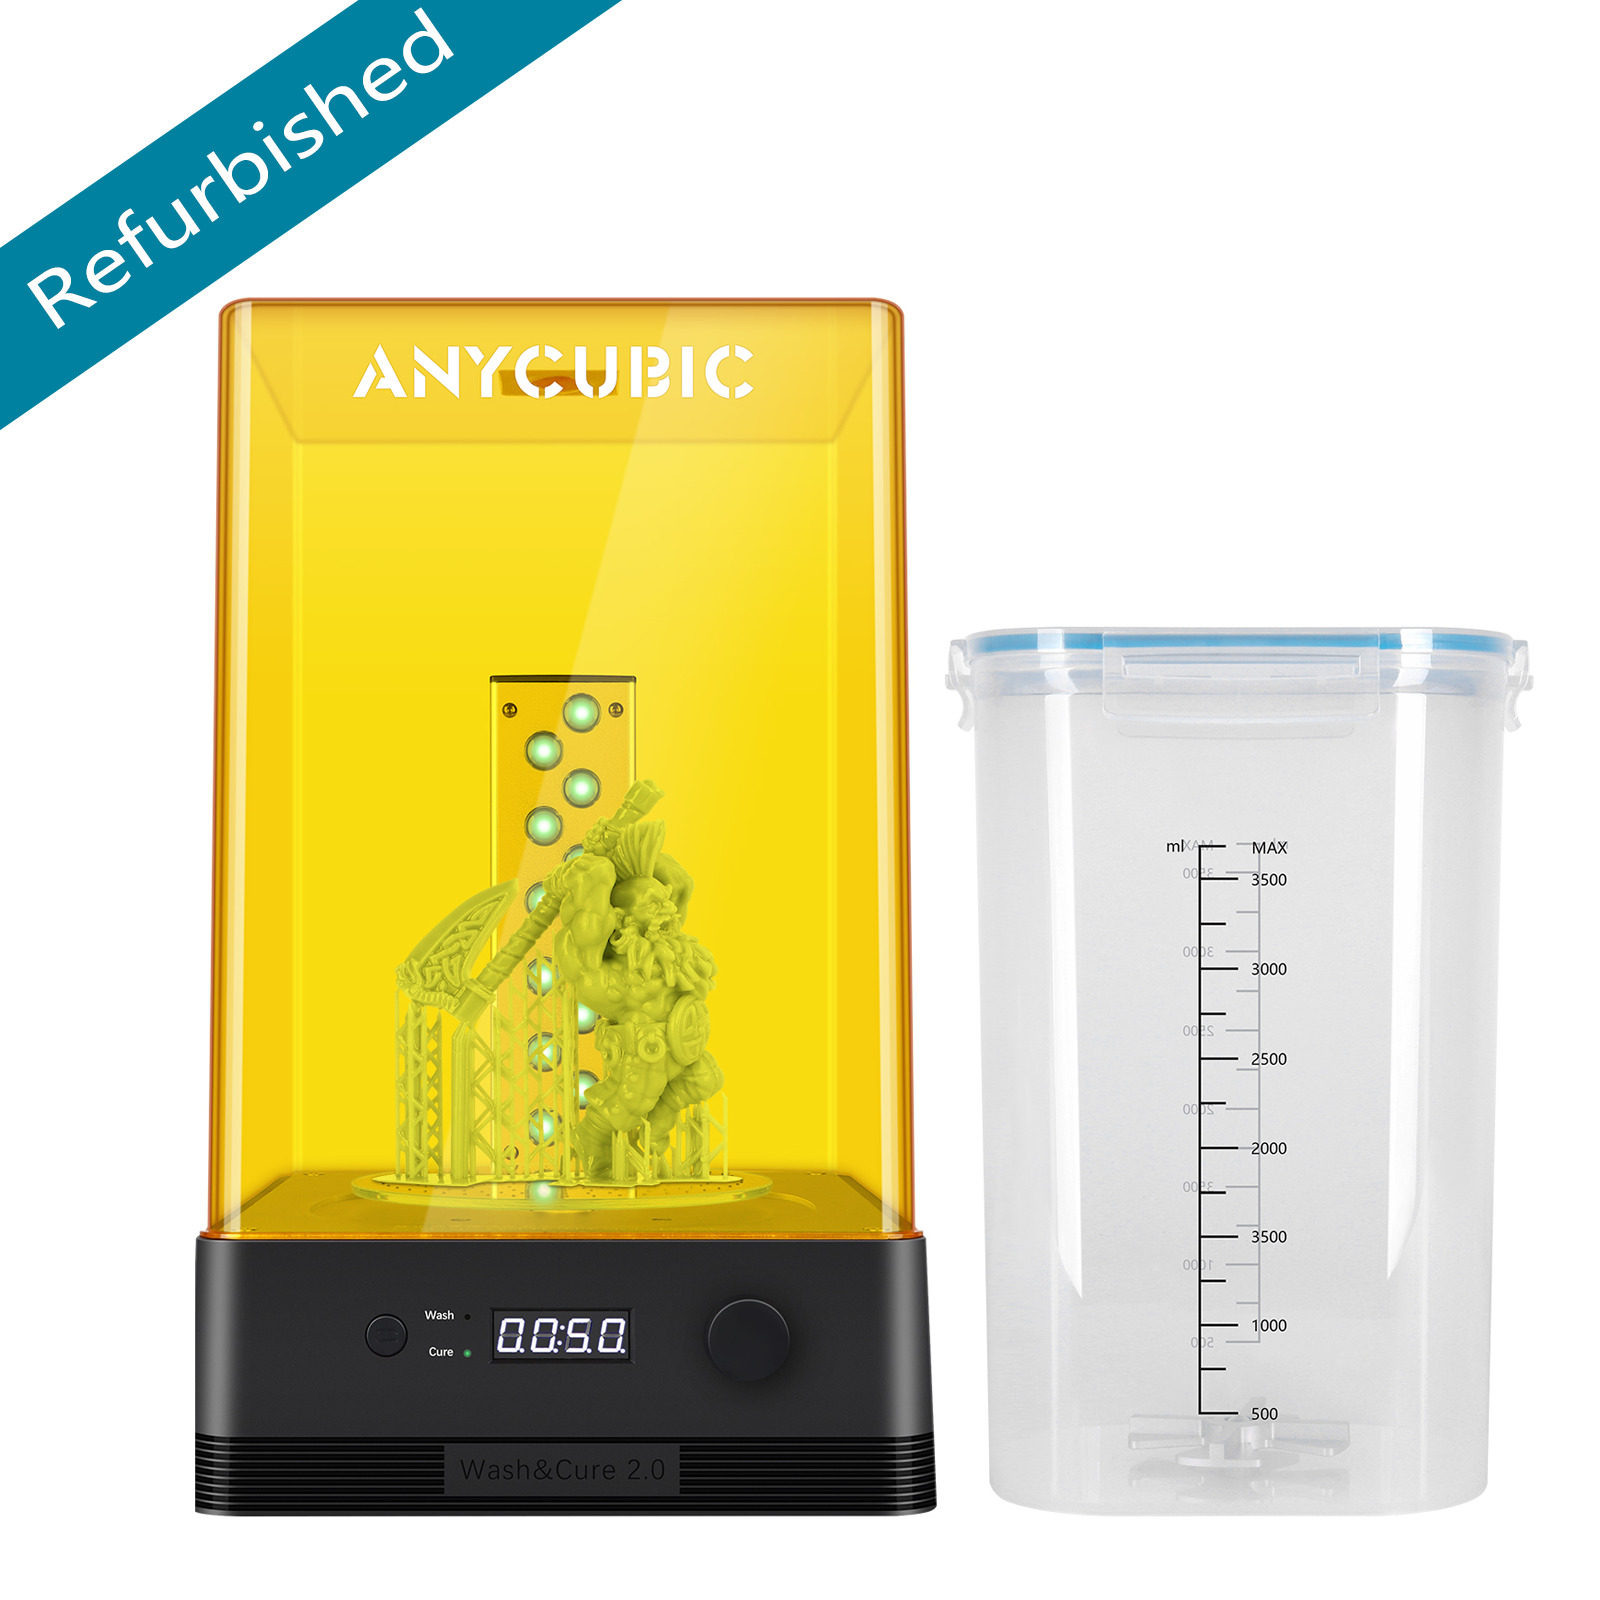 【Refurbished】Anycubic Wash and Cure 2.0 for LCD SLA 3D Printer Resin UV-Curing